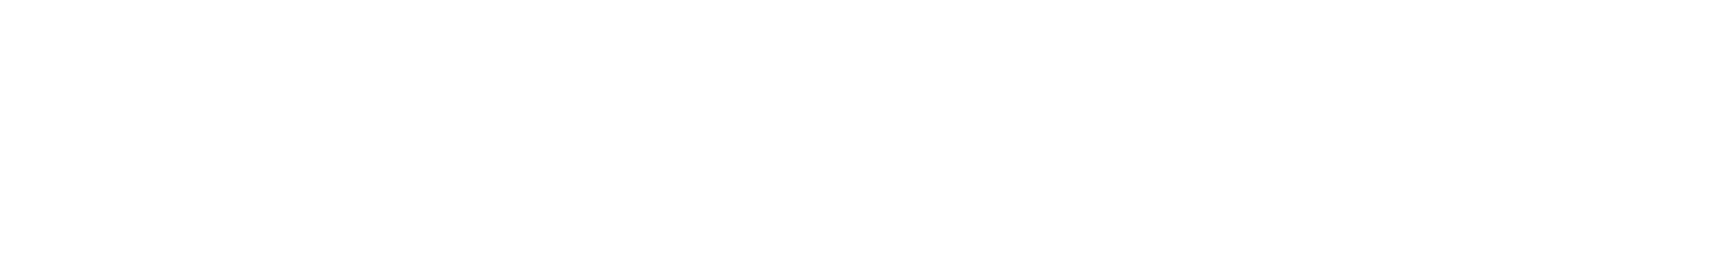 Farm Credit Connect logo in white